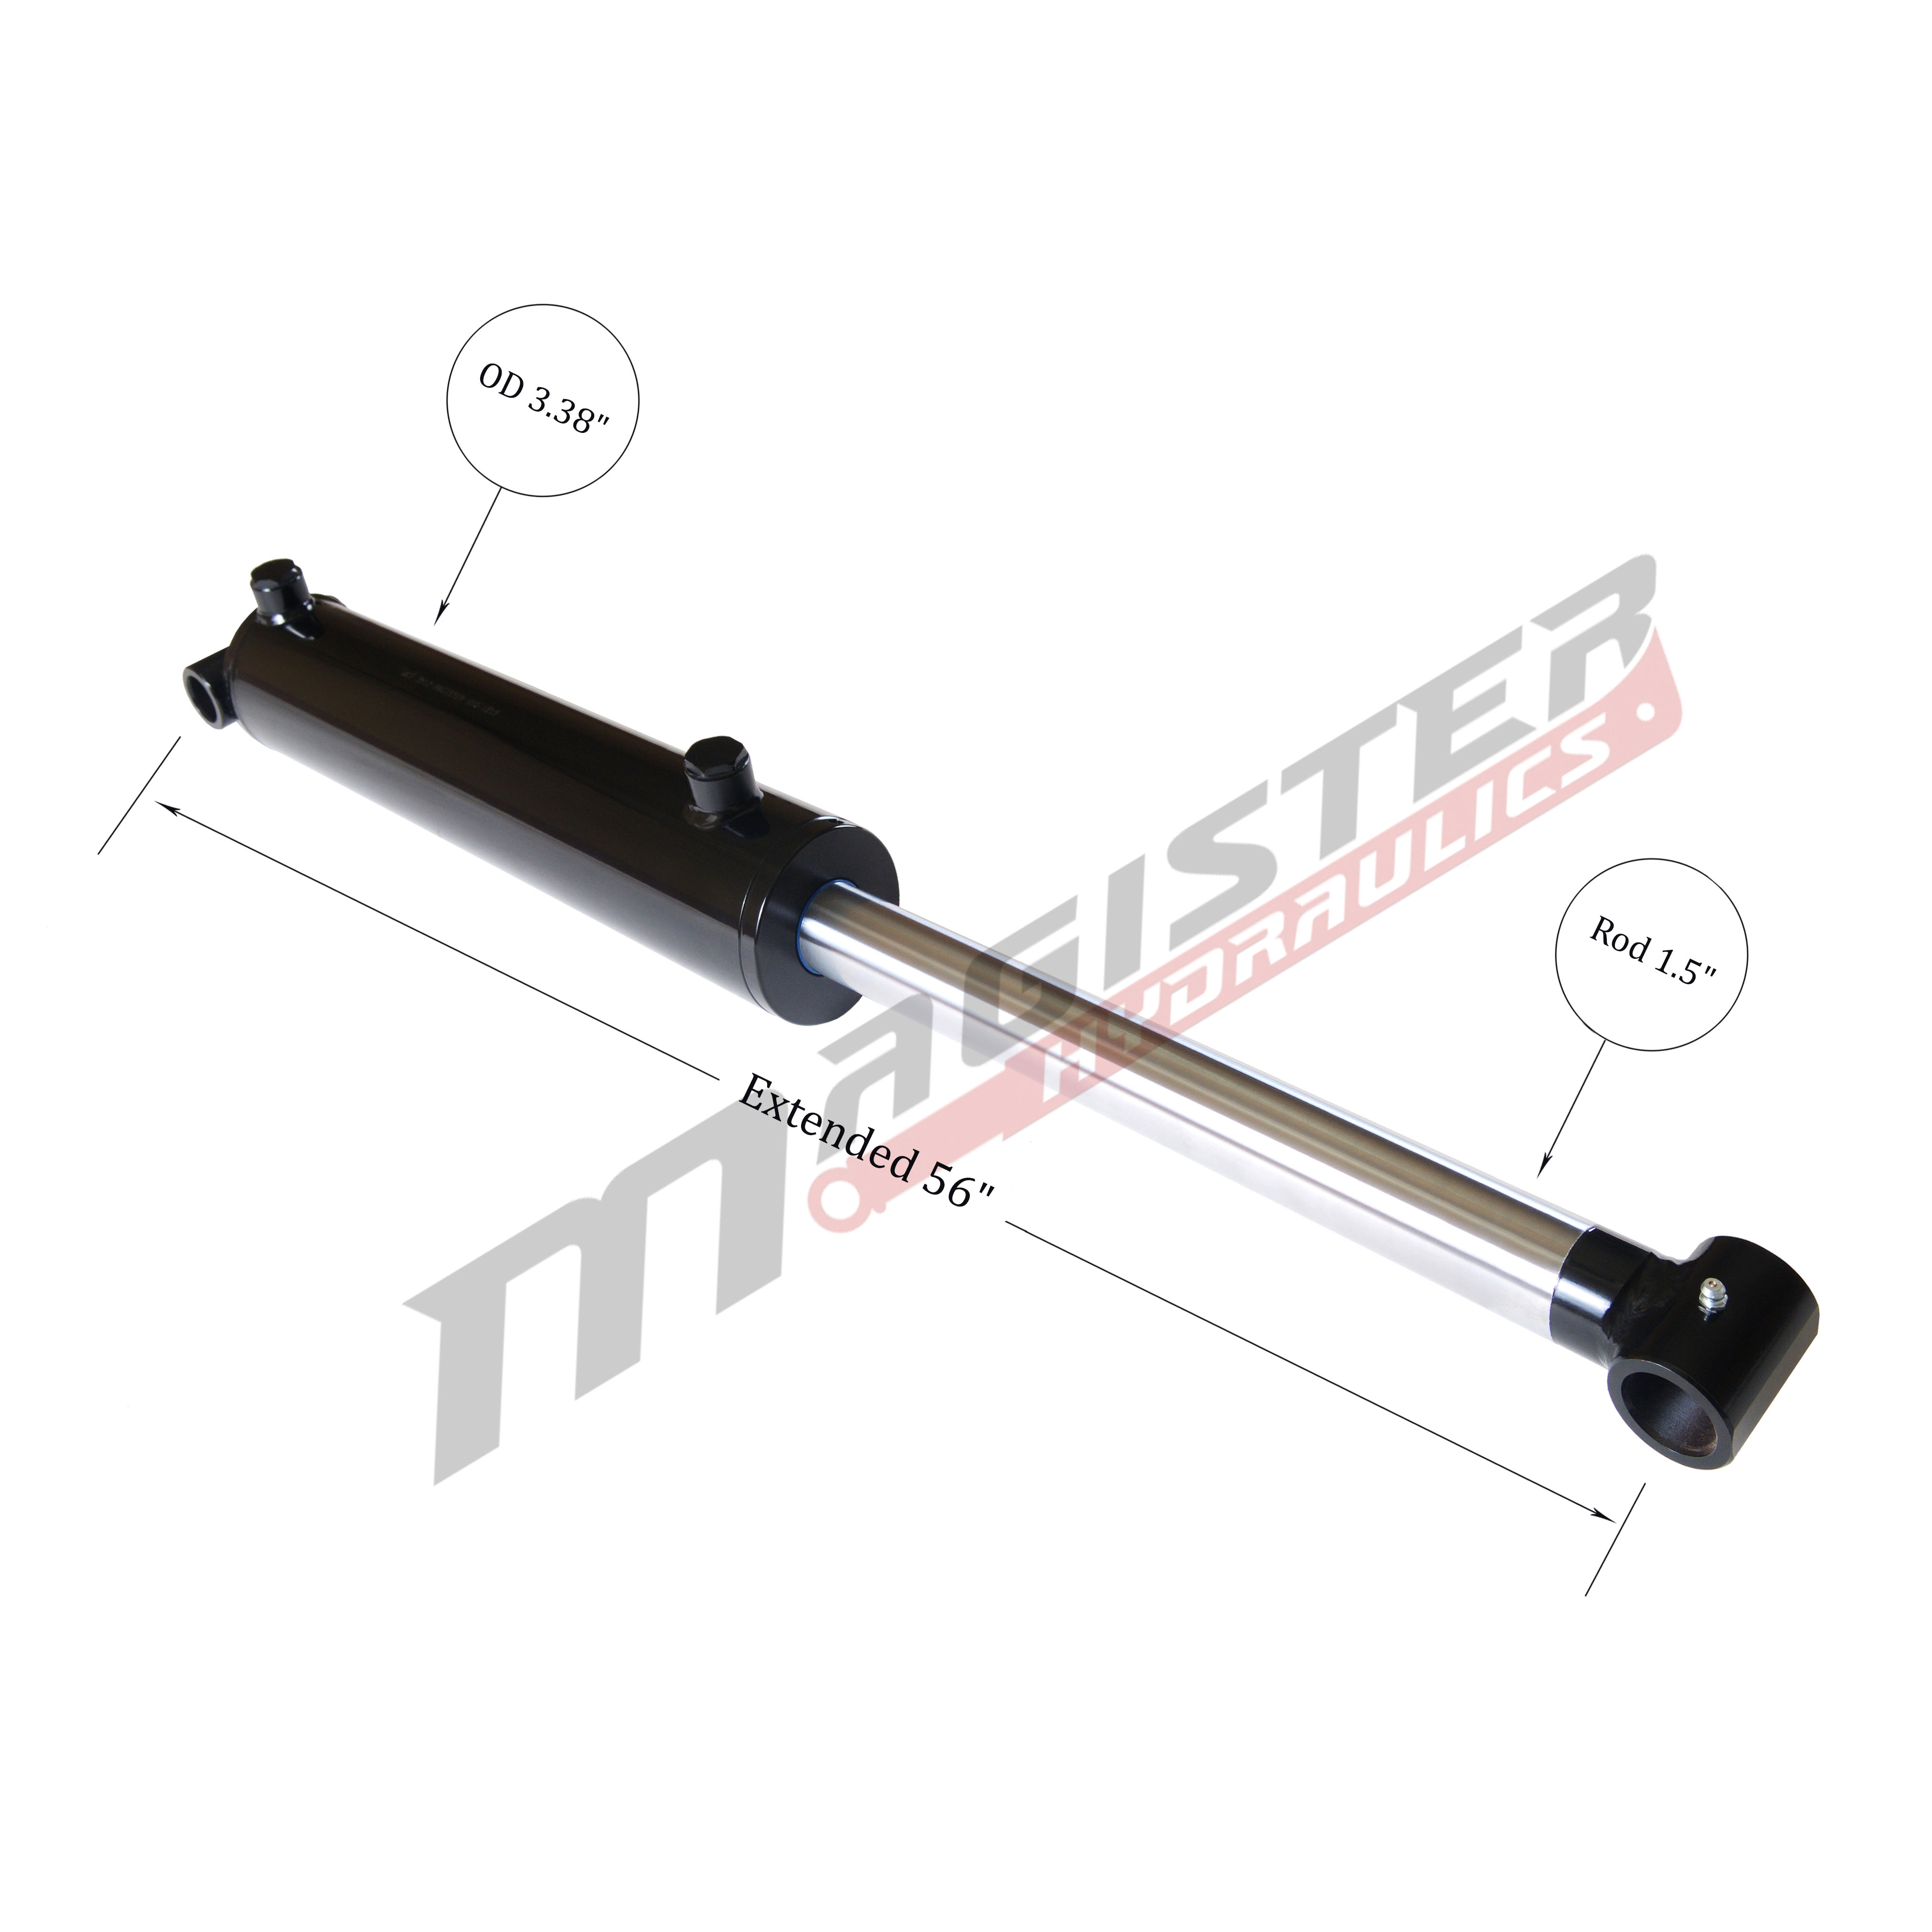 3 bore x 24 stroke hydraulic cylinder, welded cross tube double acting cylinder | Magister Hydraulics